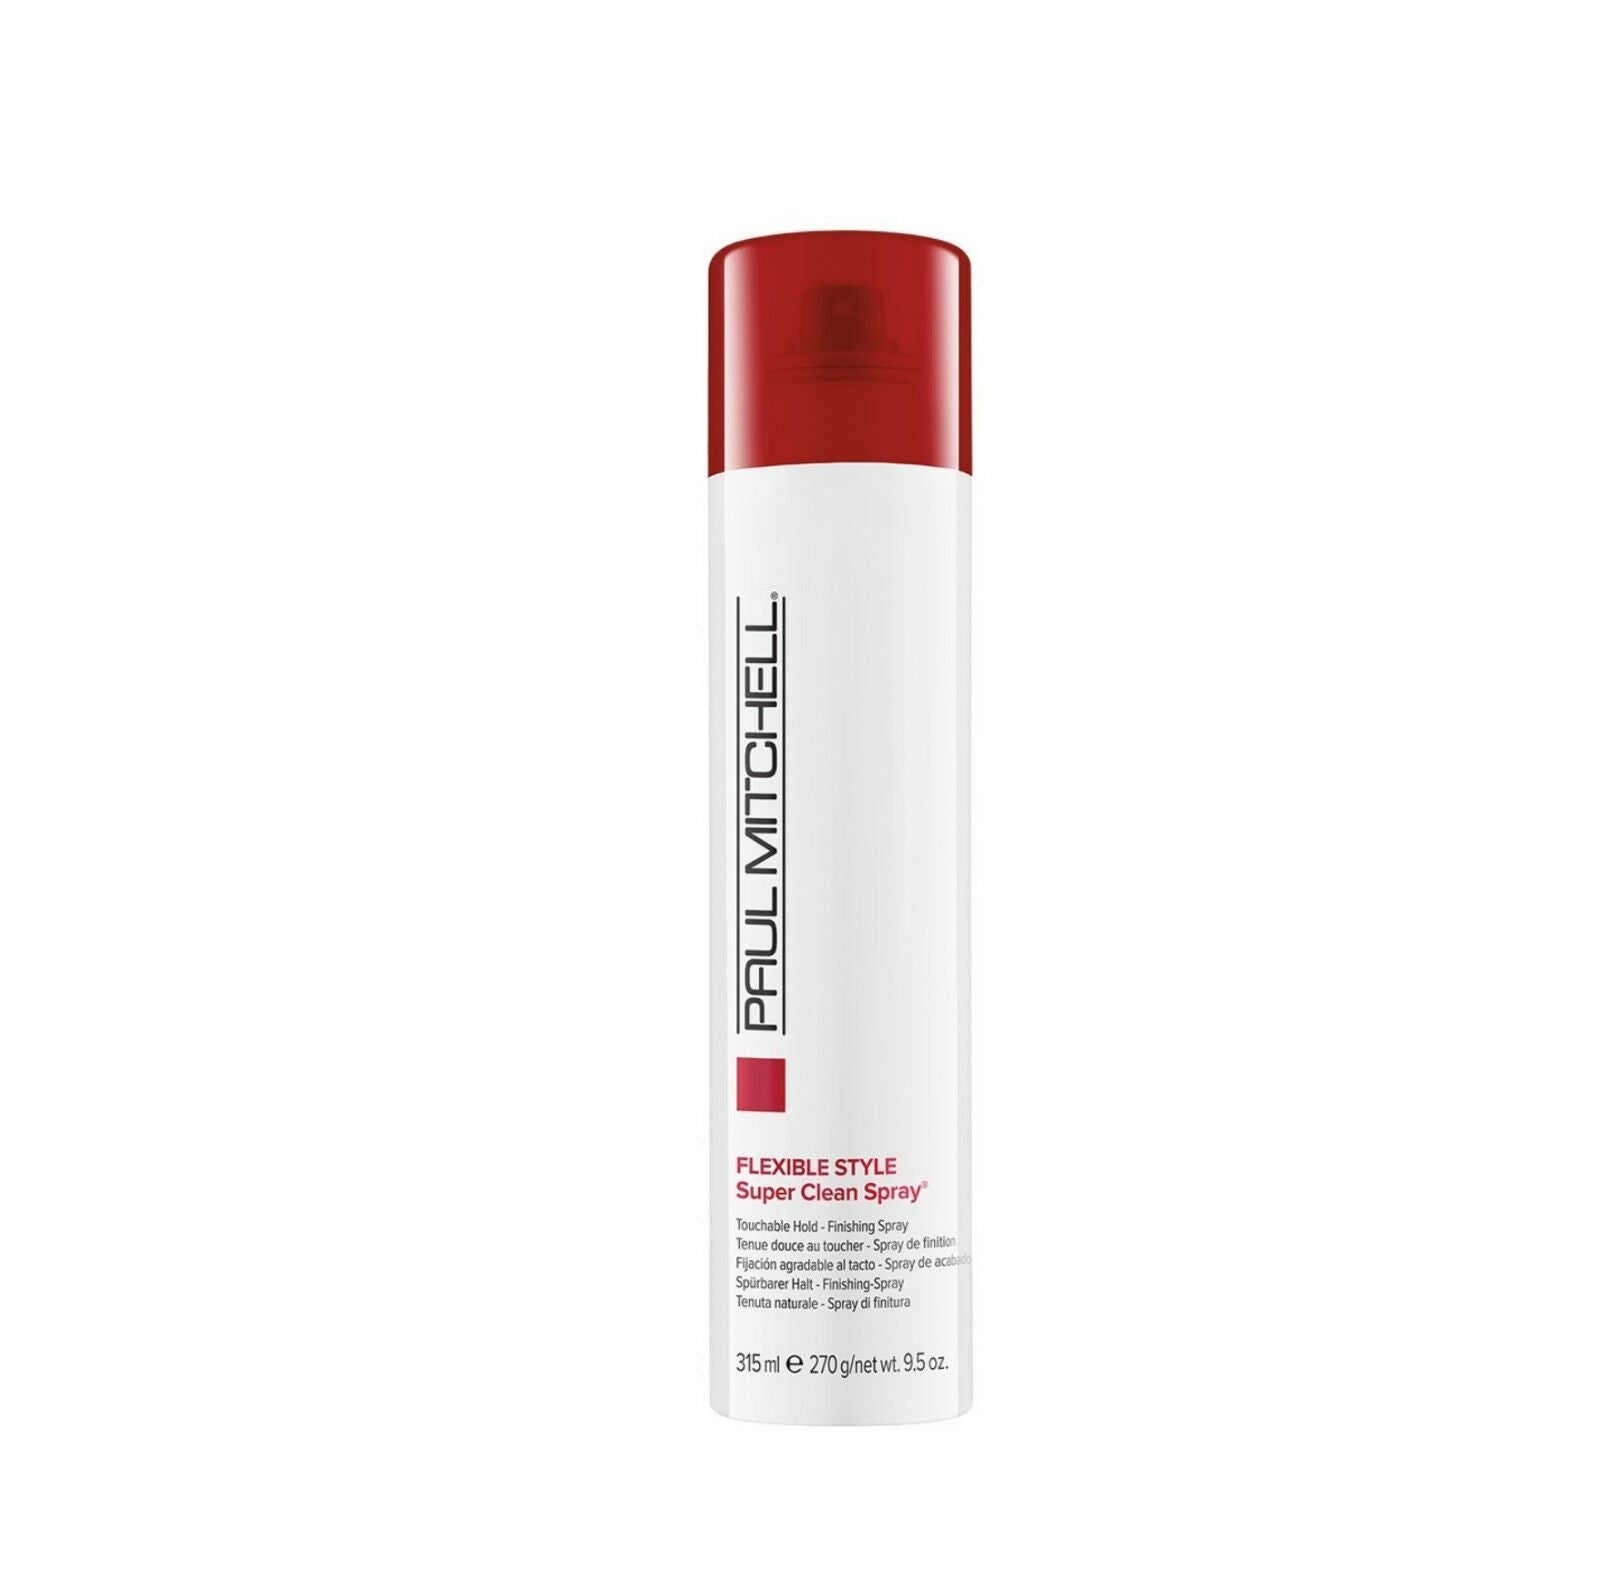 Paul Mitchell Flexible Style Super Clean Spray Touchable Hold Finish 315ml x 2 Paul Mitchell Styling - On Line Hair Depot